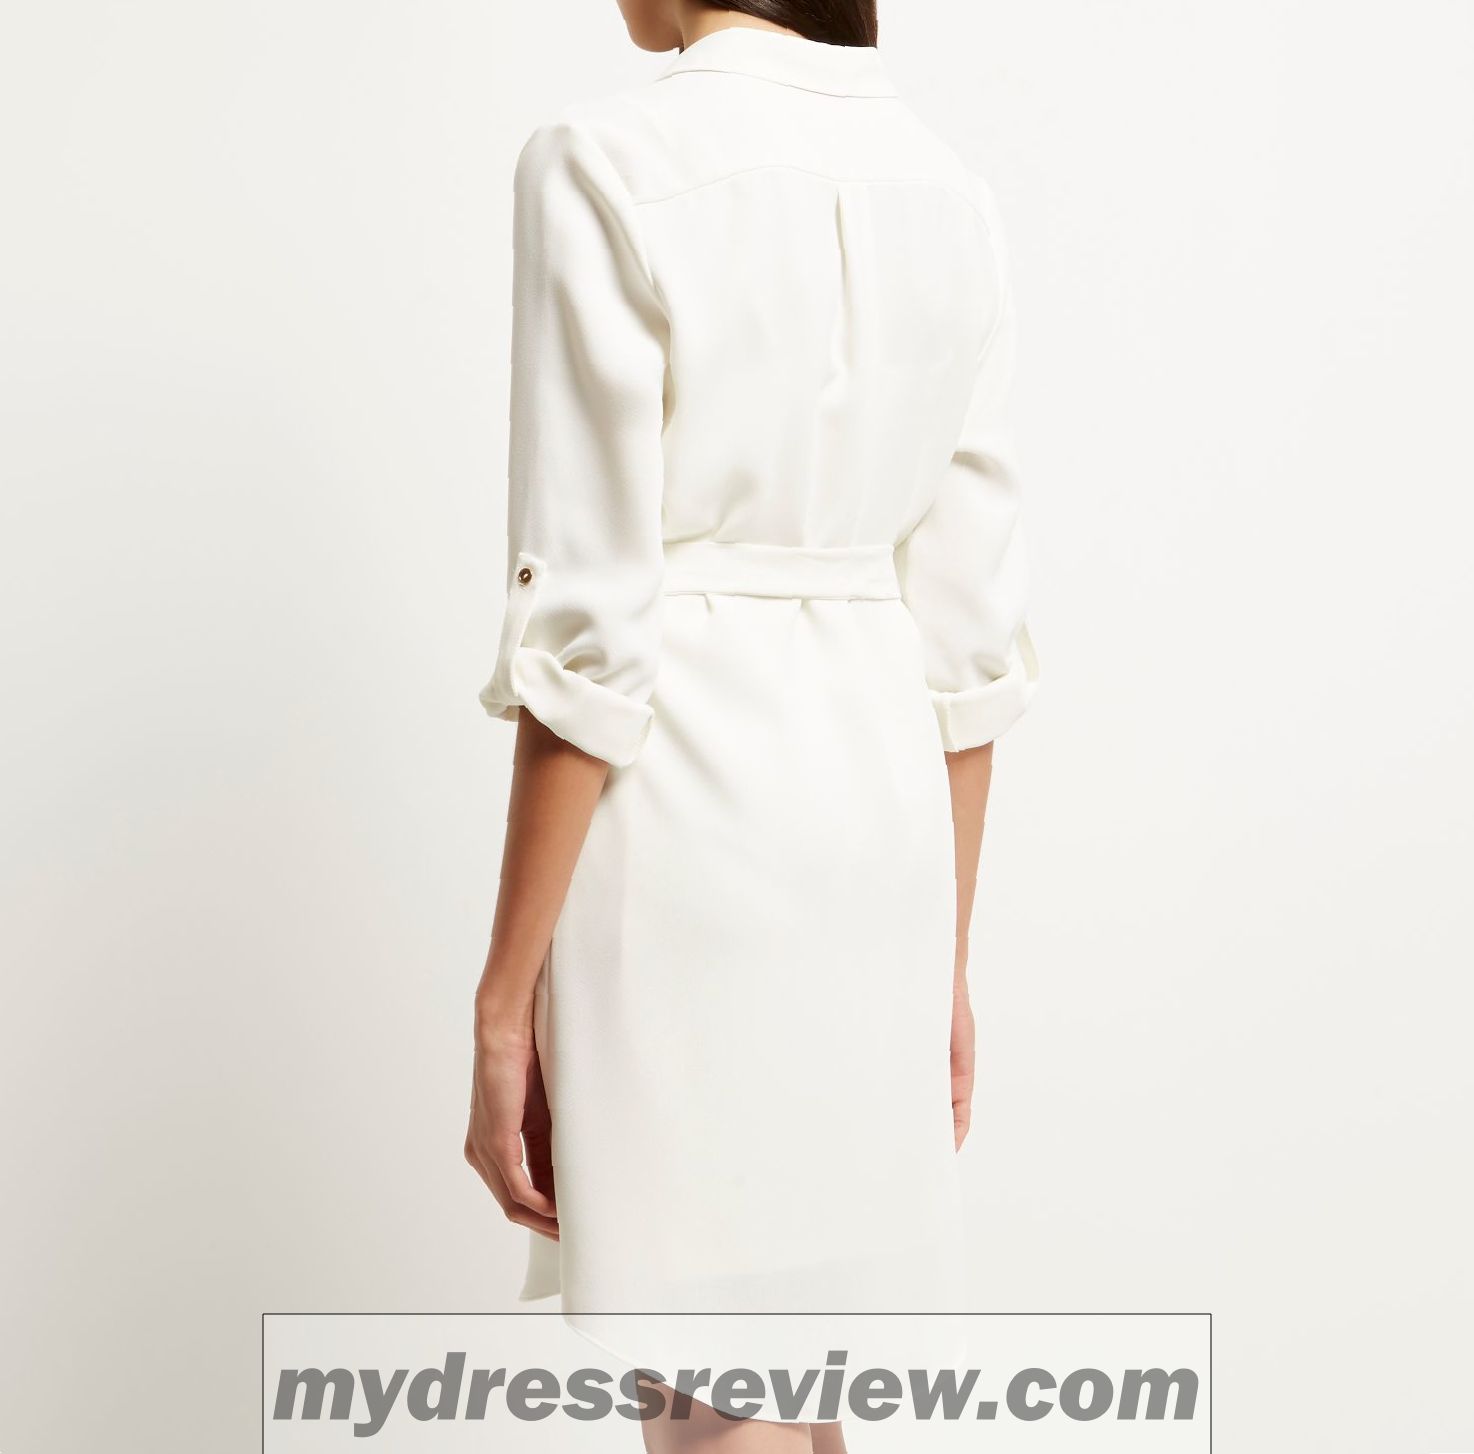 White River Island Dress - Things To Know